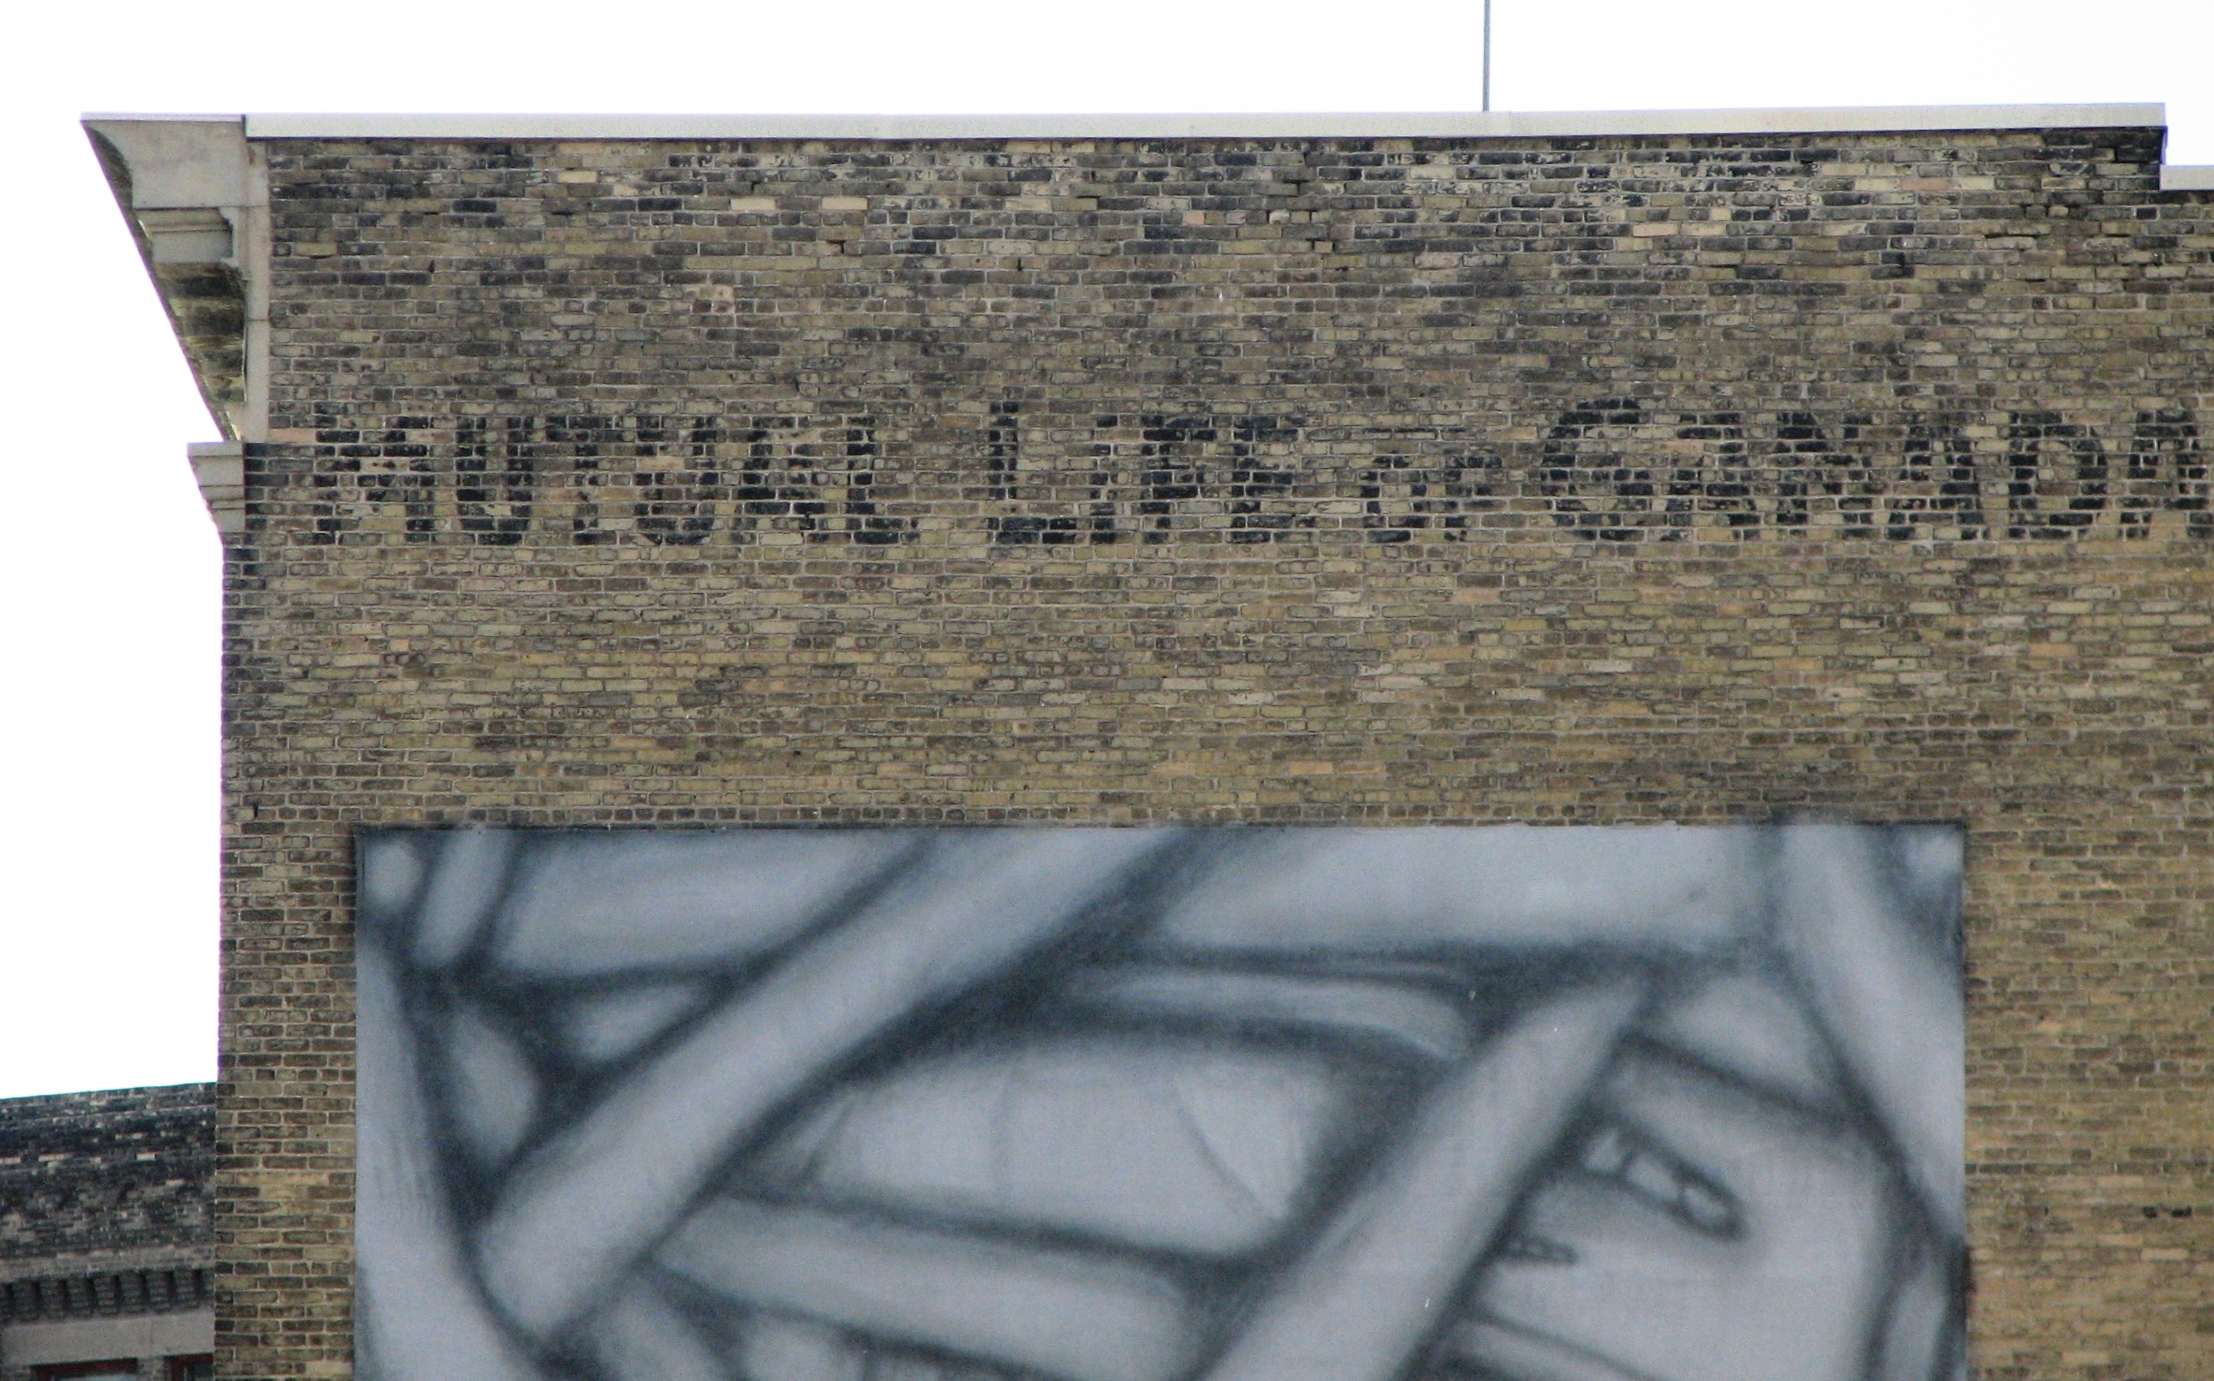 Ghost Sign on former Bate Building at 221 McDermot that reads Mutual Life of Canada